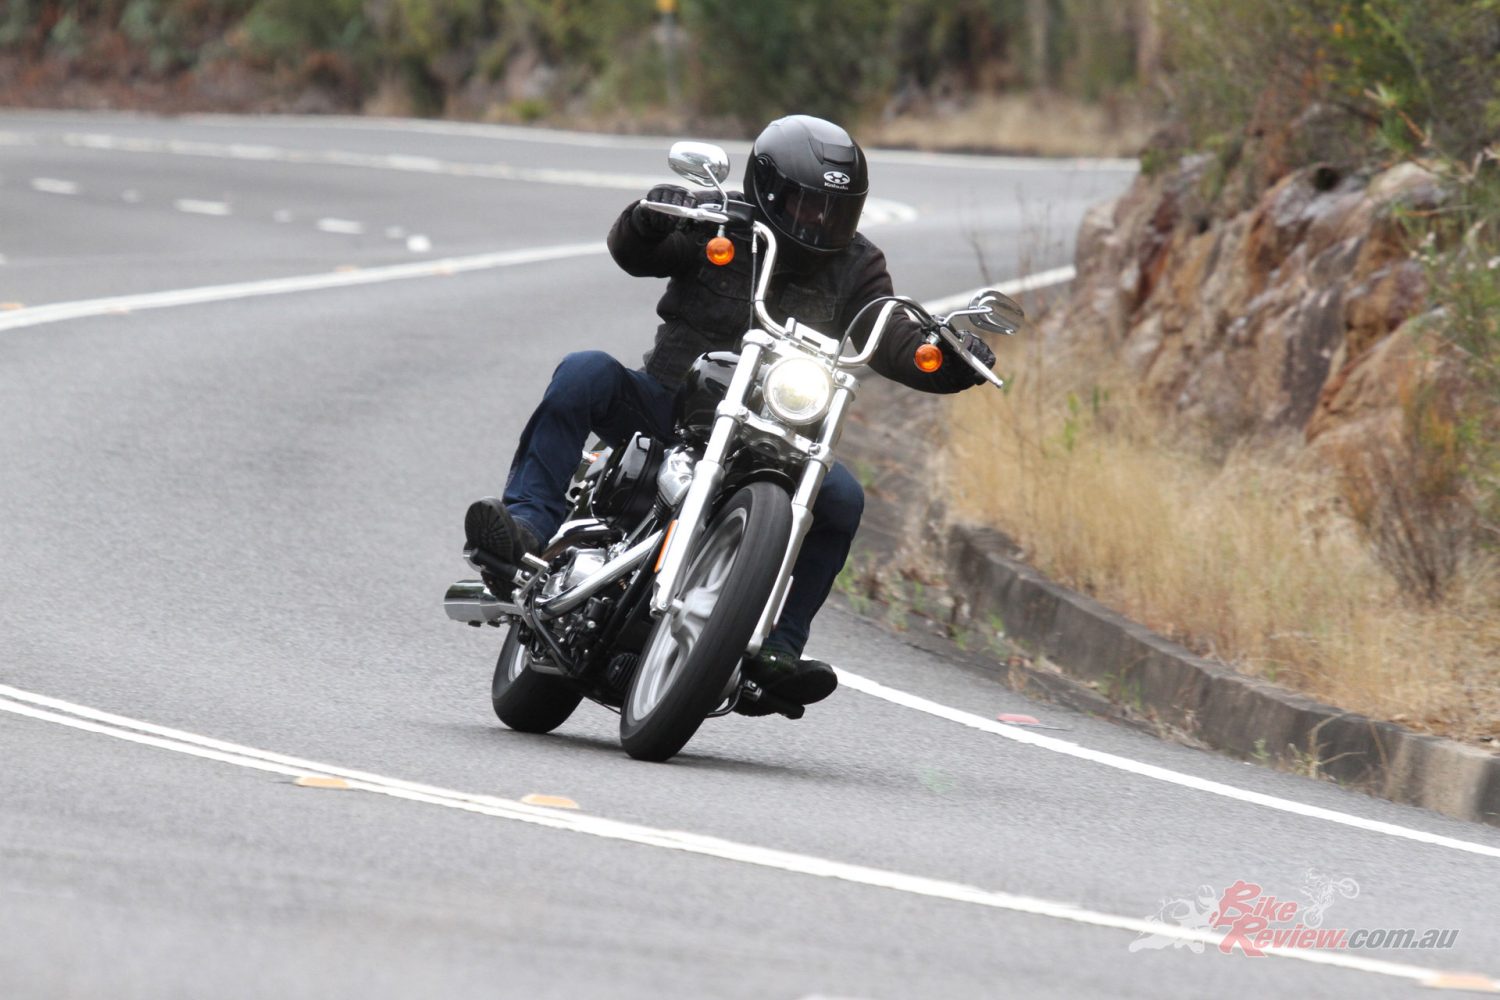 No need to fang the lights out of the Softail Standard. Just enjoy a smooth and slow ride through the twisties.